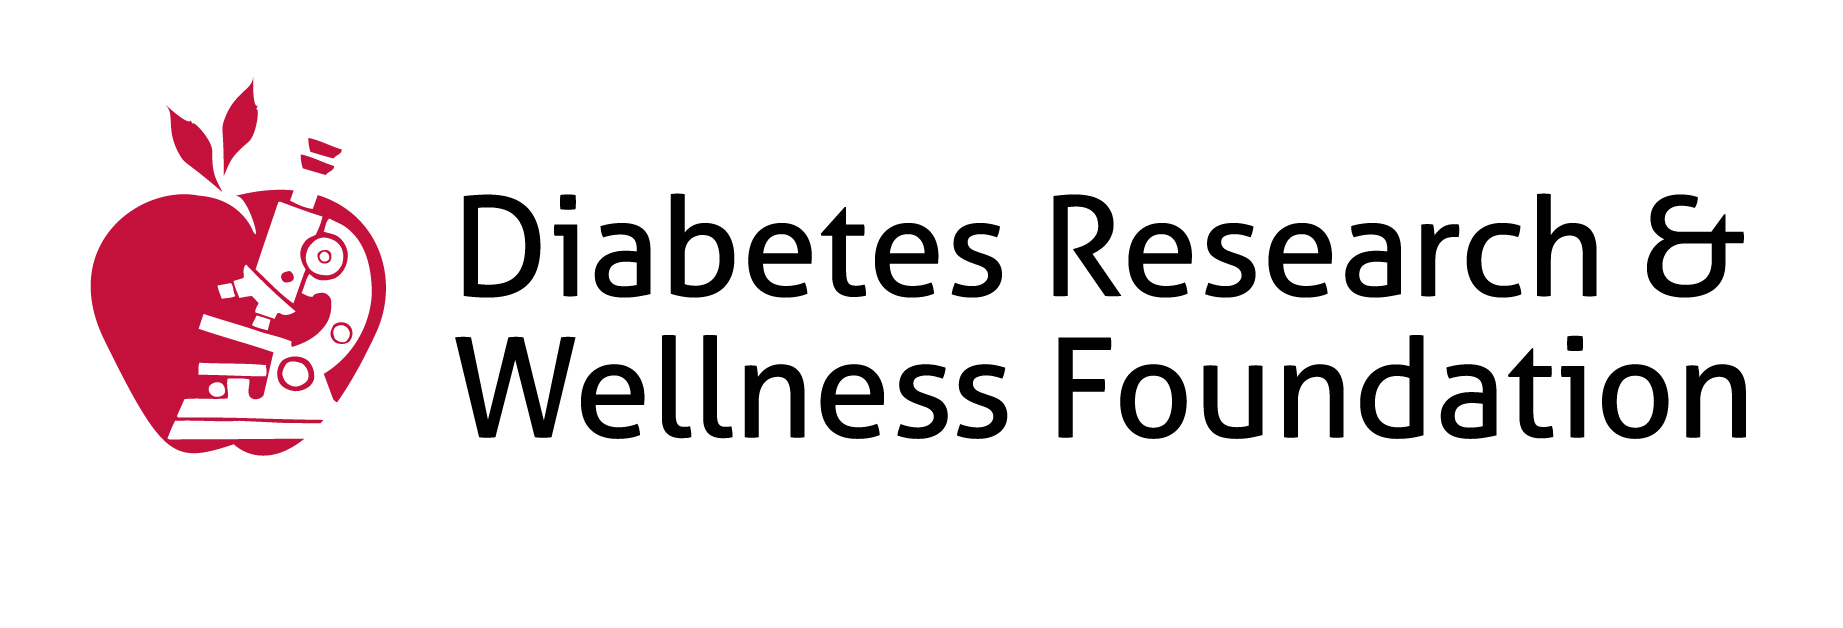 diabetes research and wellness foundation grant)